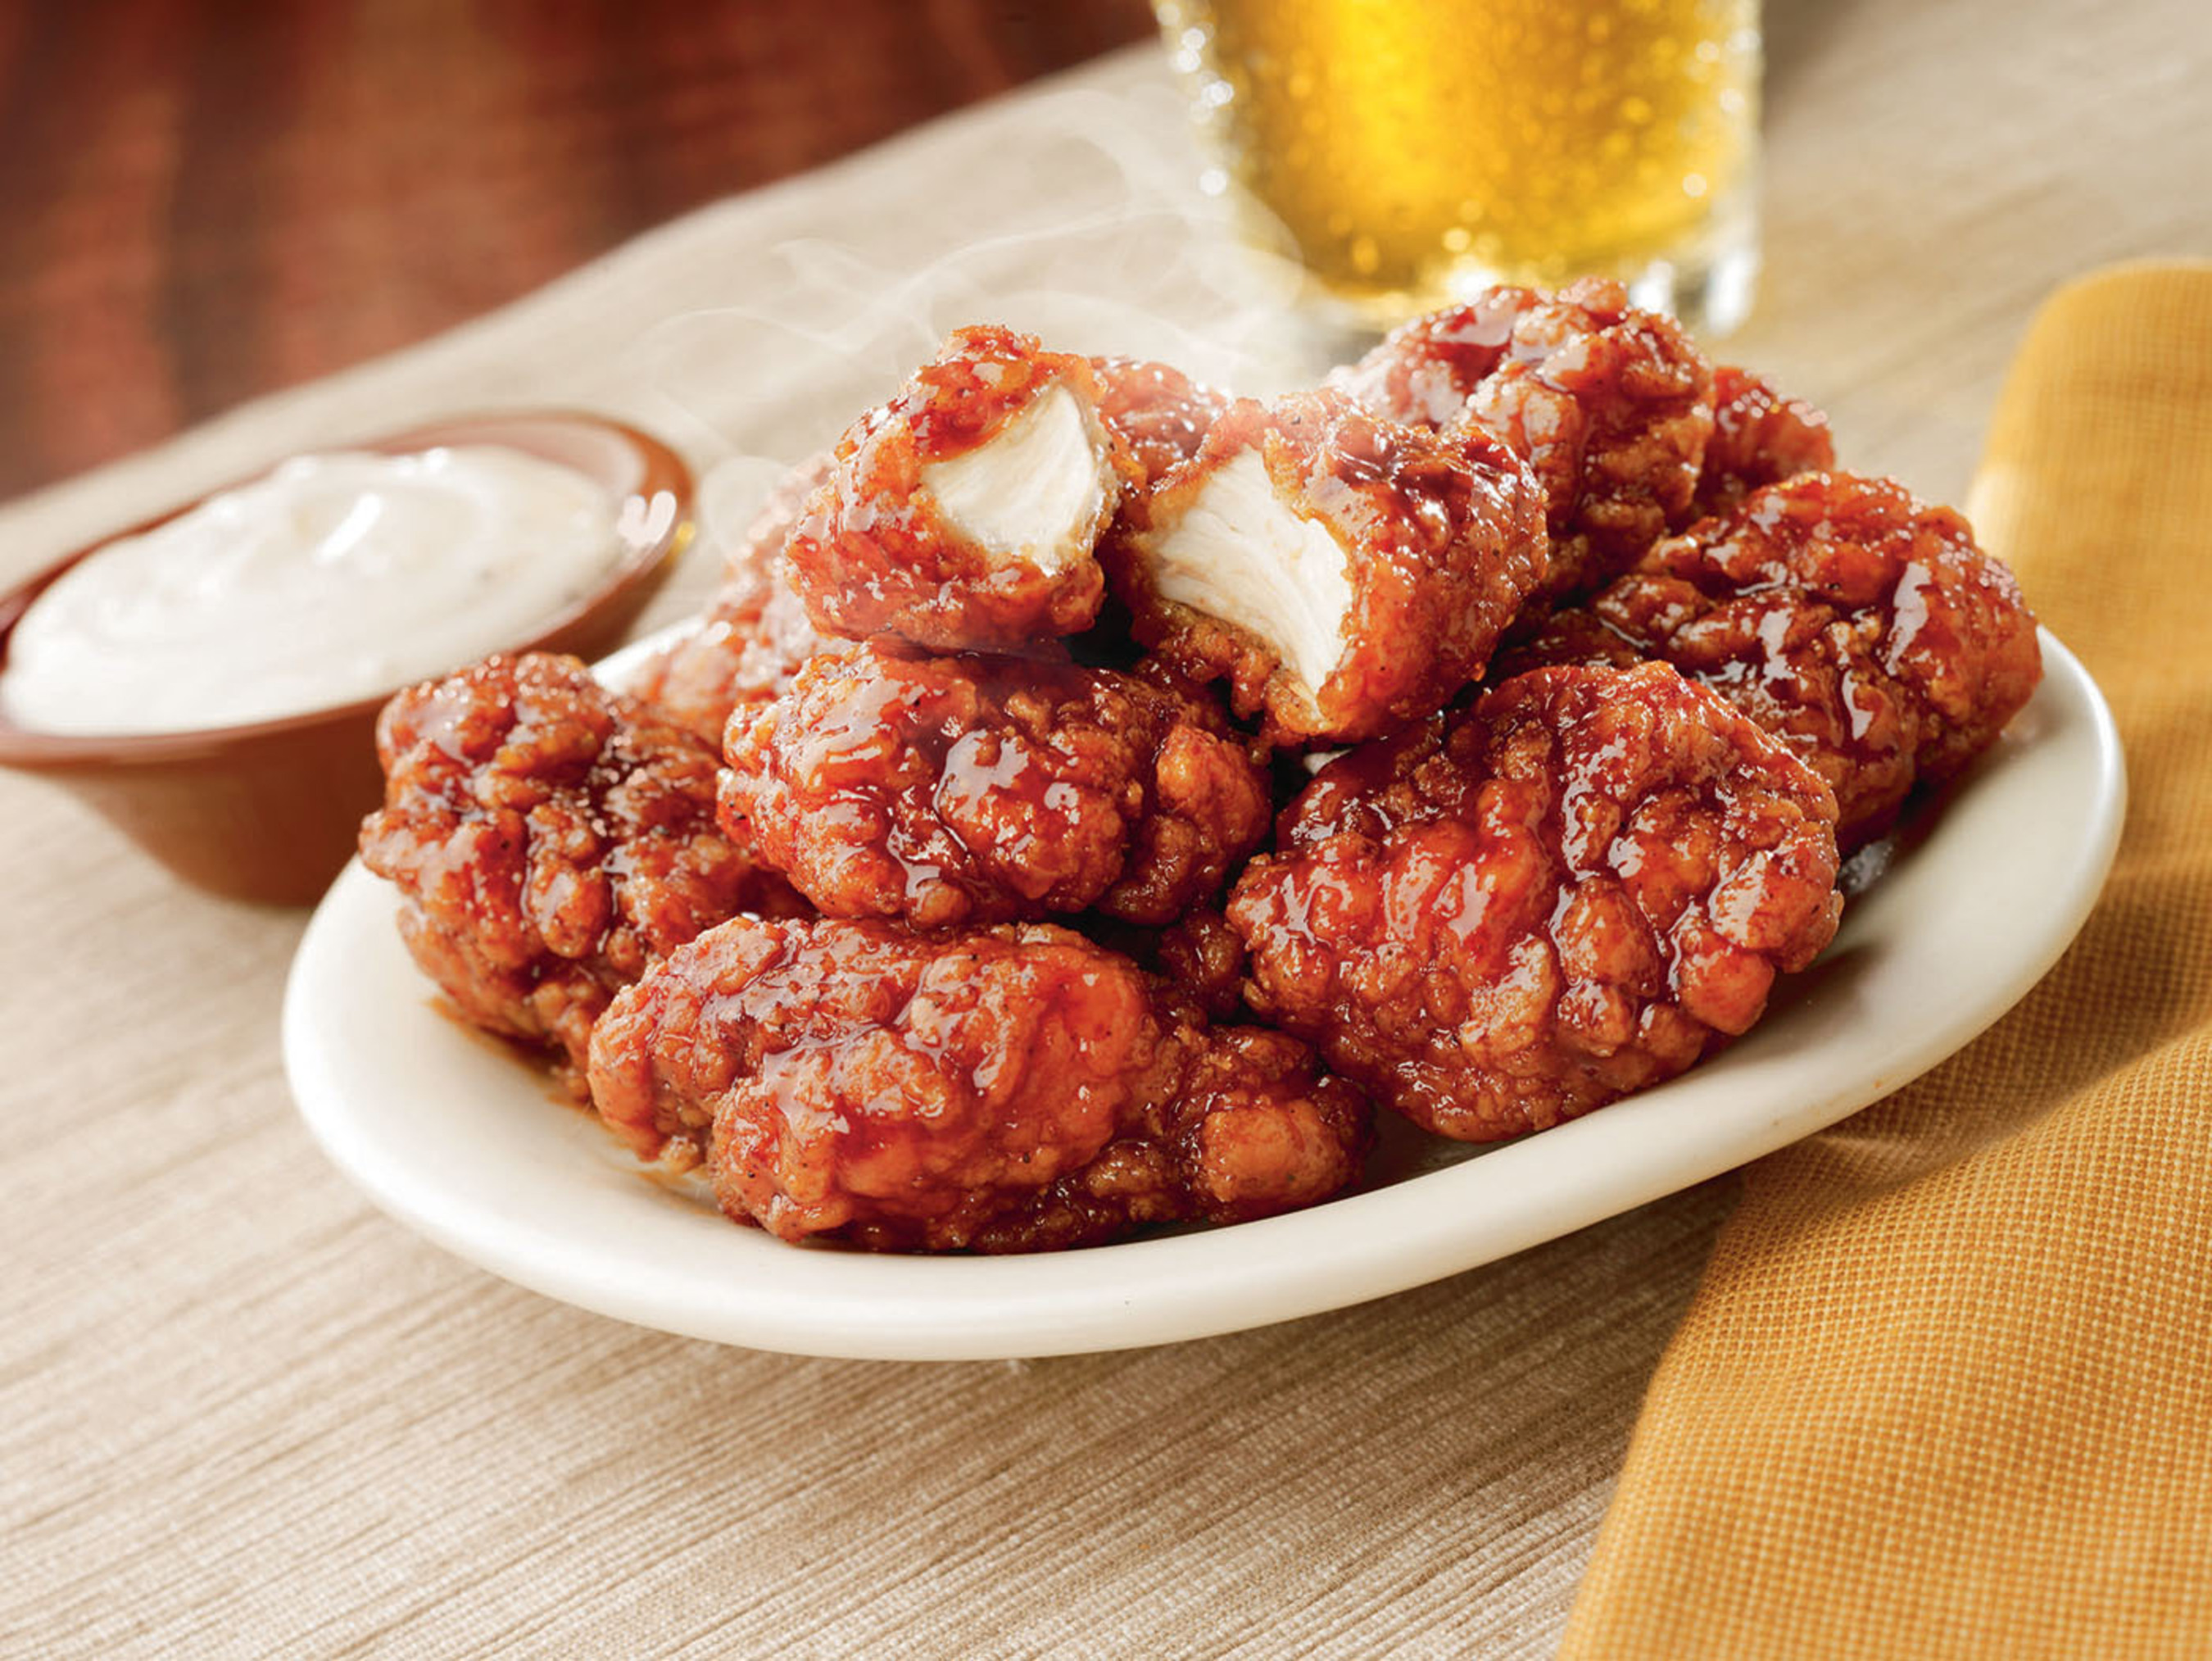 Are pizza hut wings good? Top 5 best wings